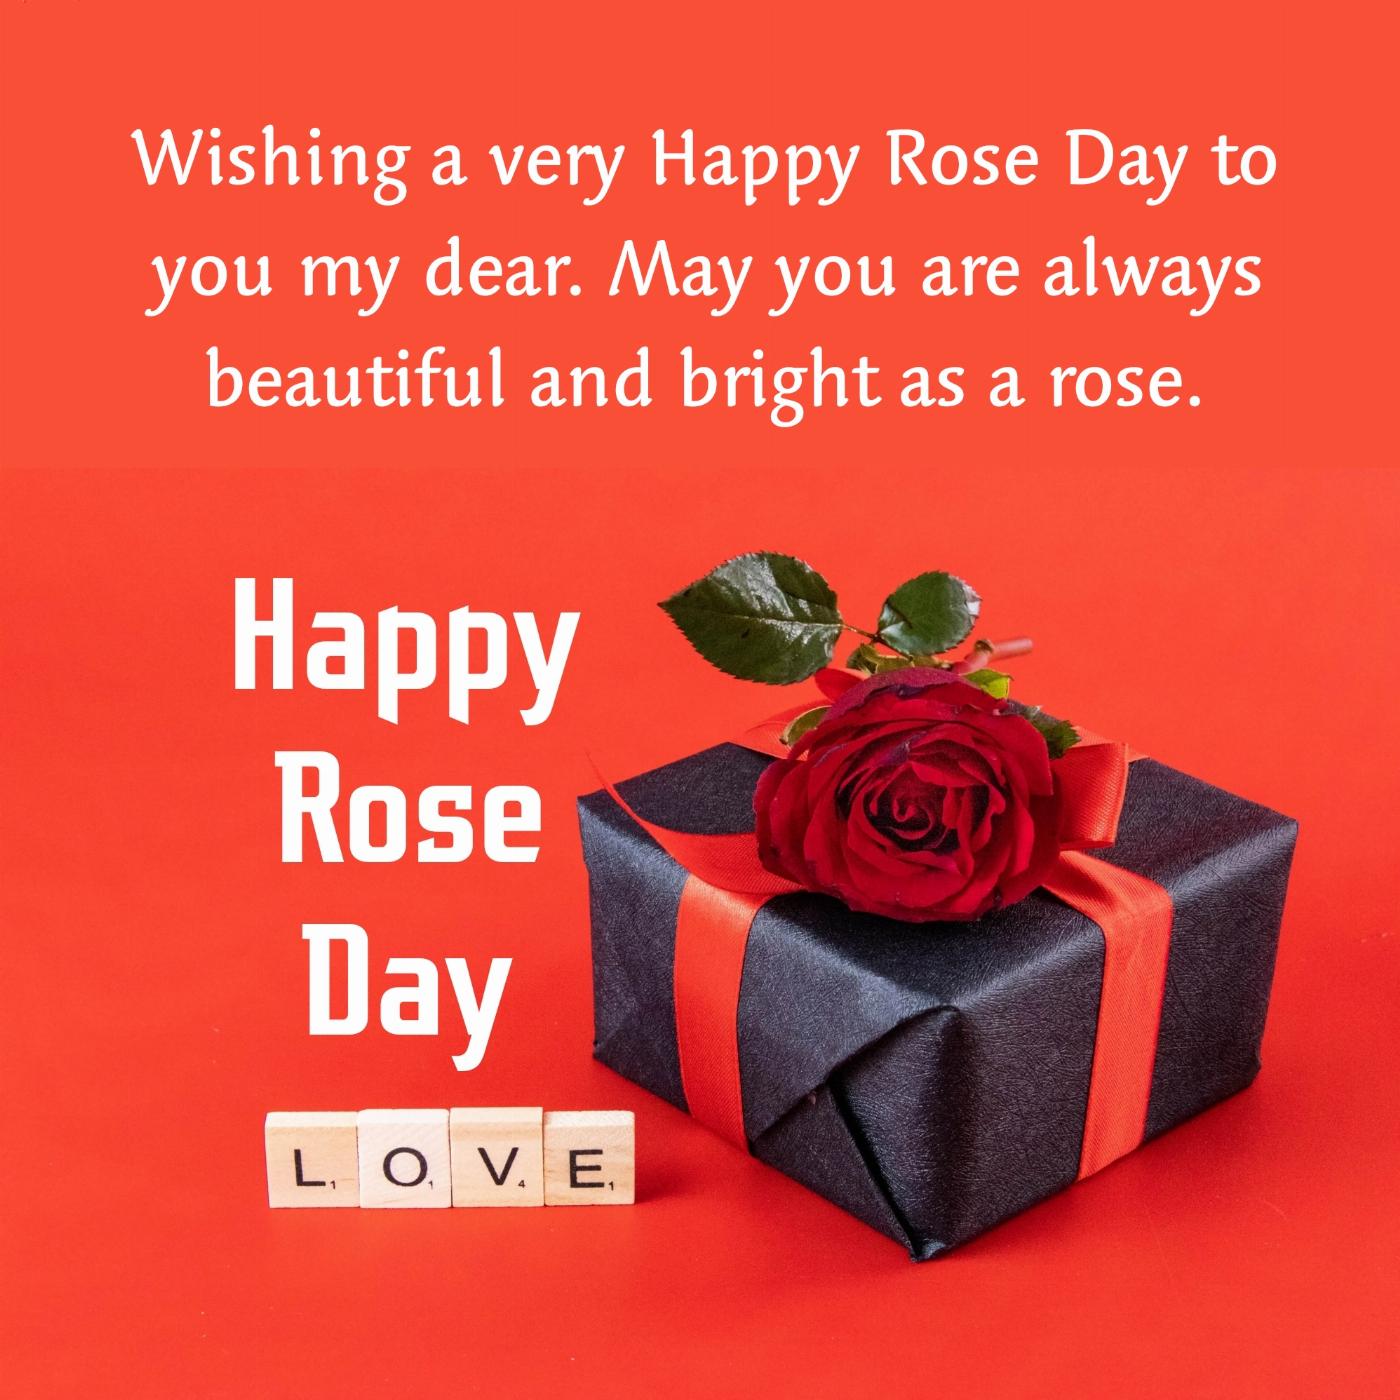 Wishing a very Happy Rose Day to you my dear